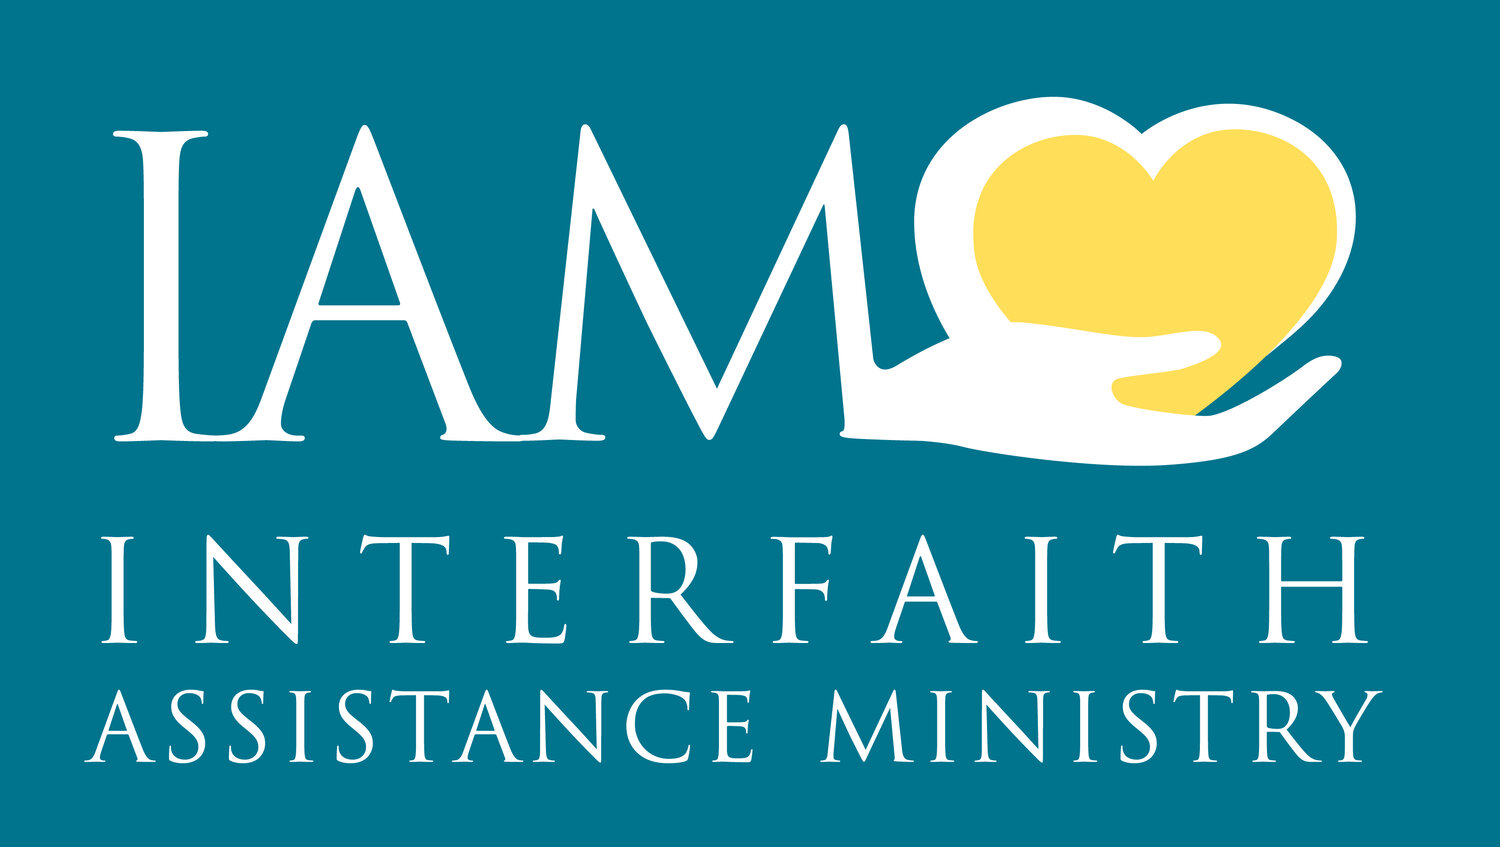 Interfaith Assistance Ministry